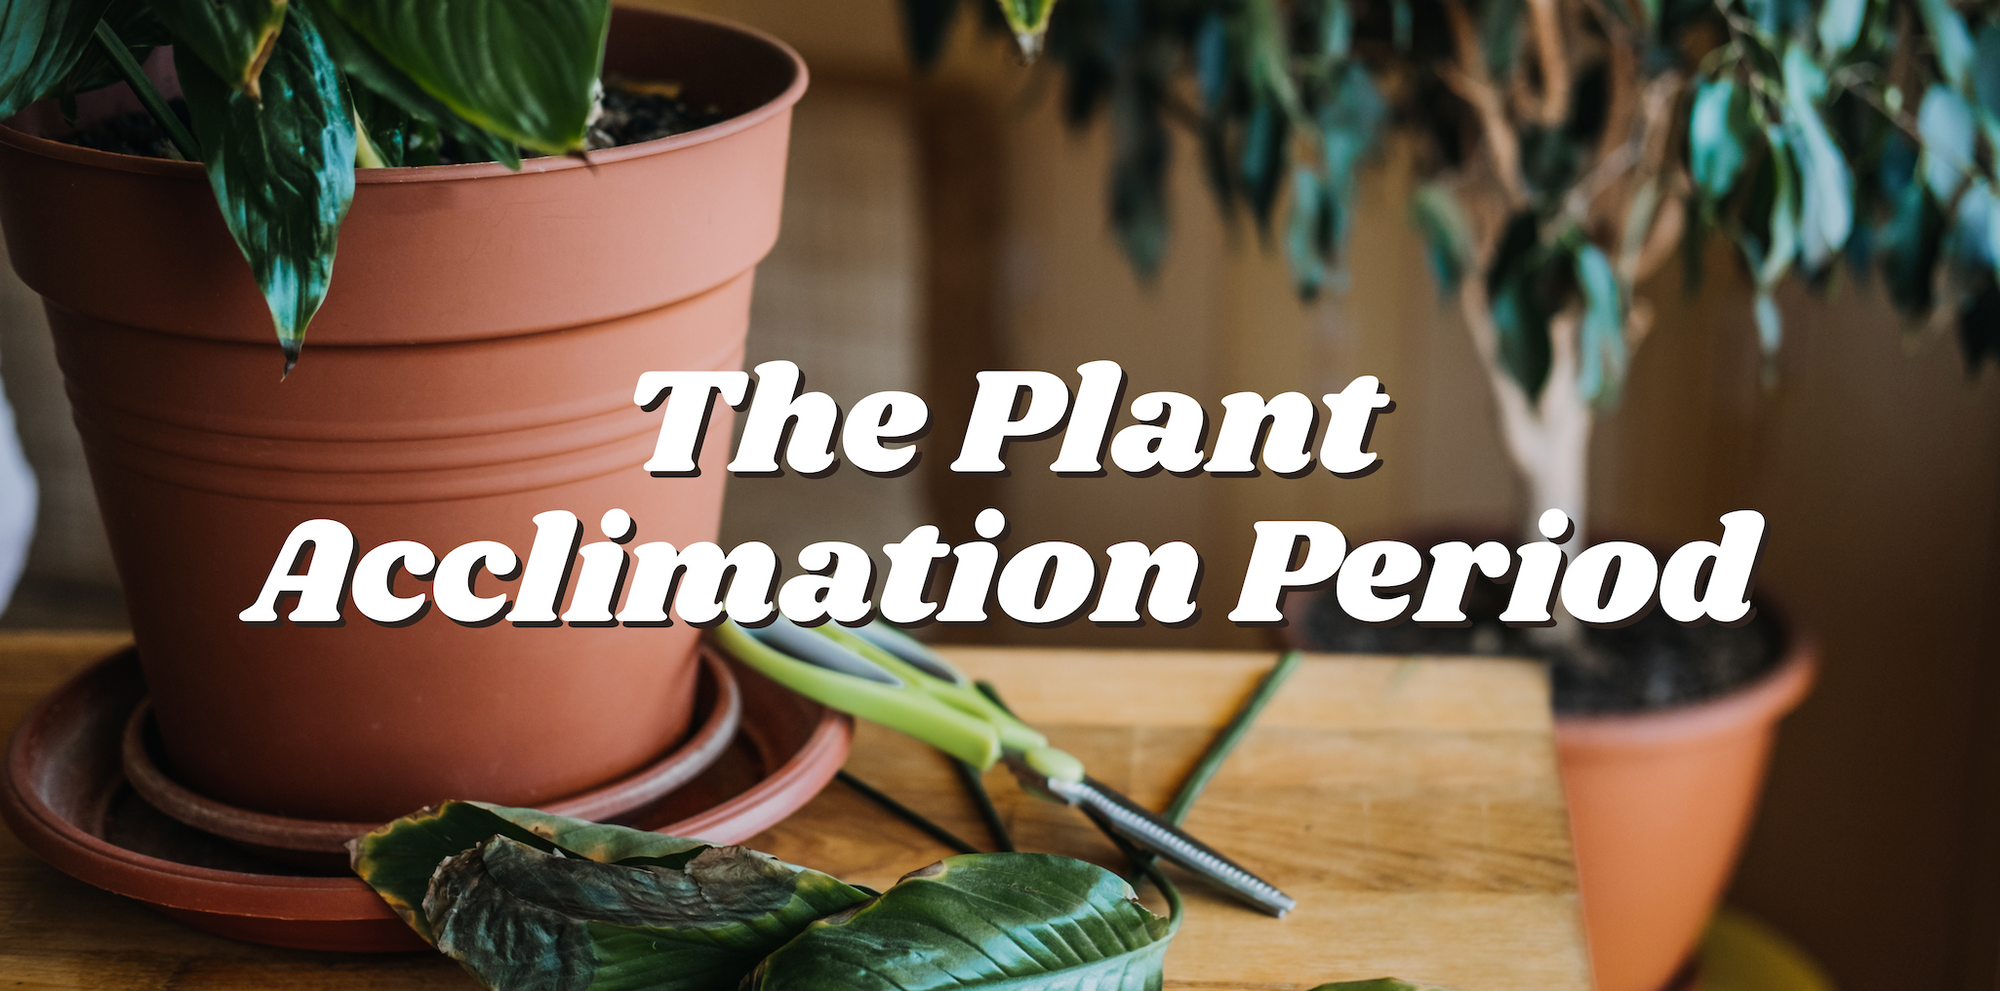 The Plant Acclimation Period